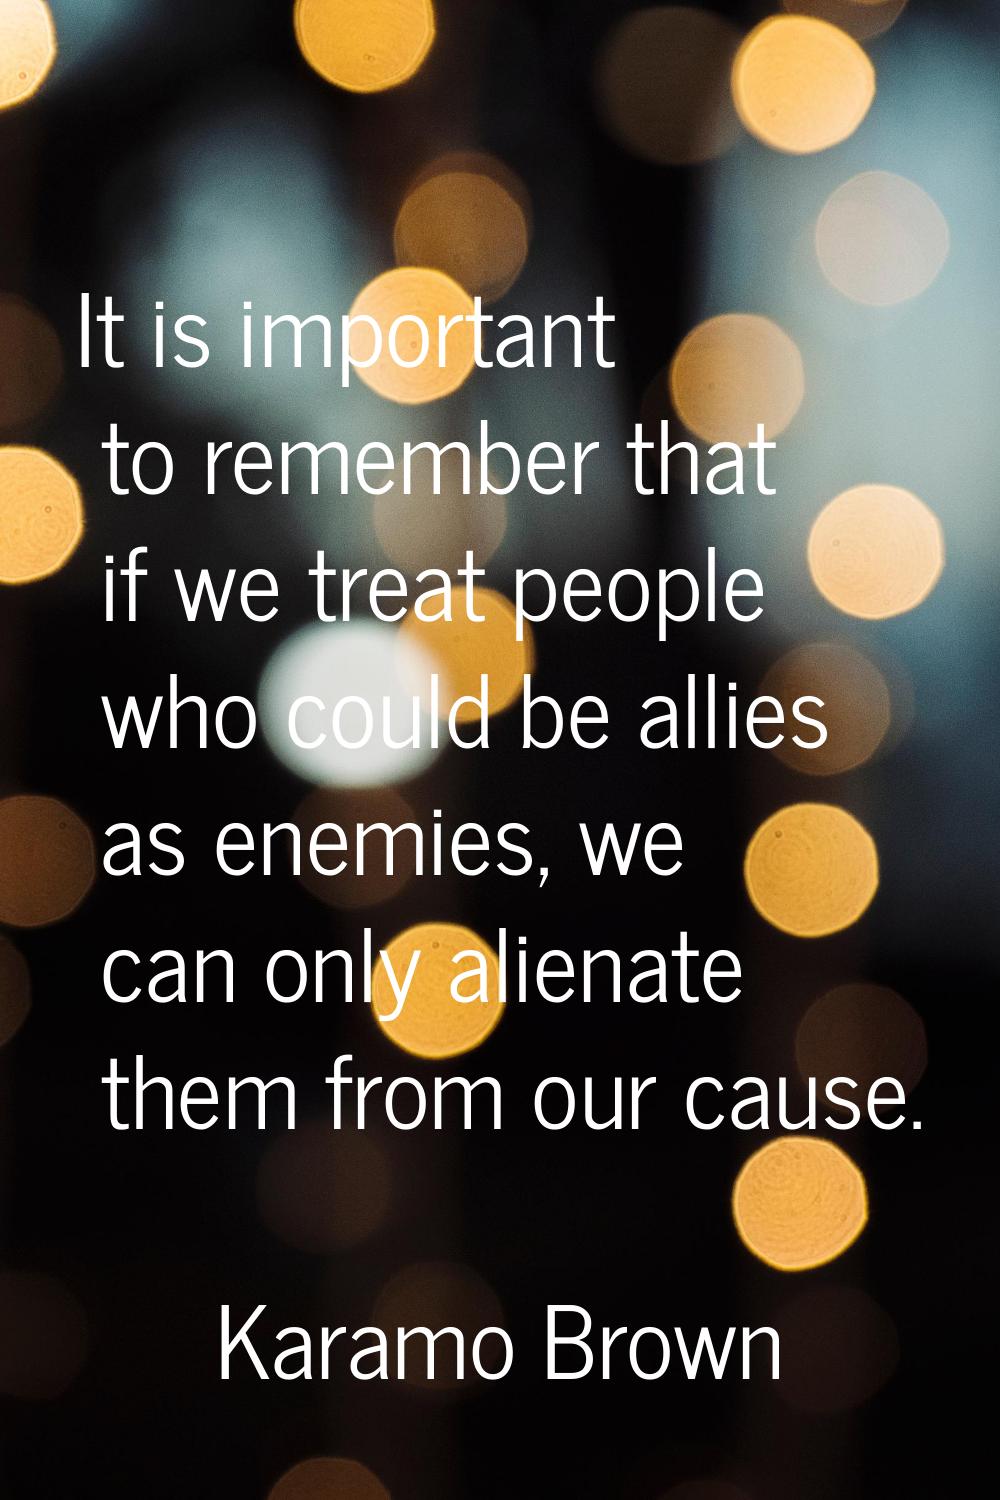 It is important to remember that if we treat people who could be allies as enemies, we can only ali